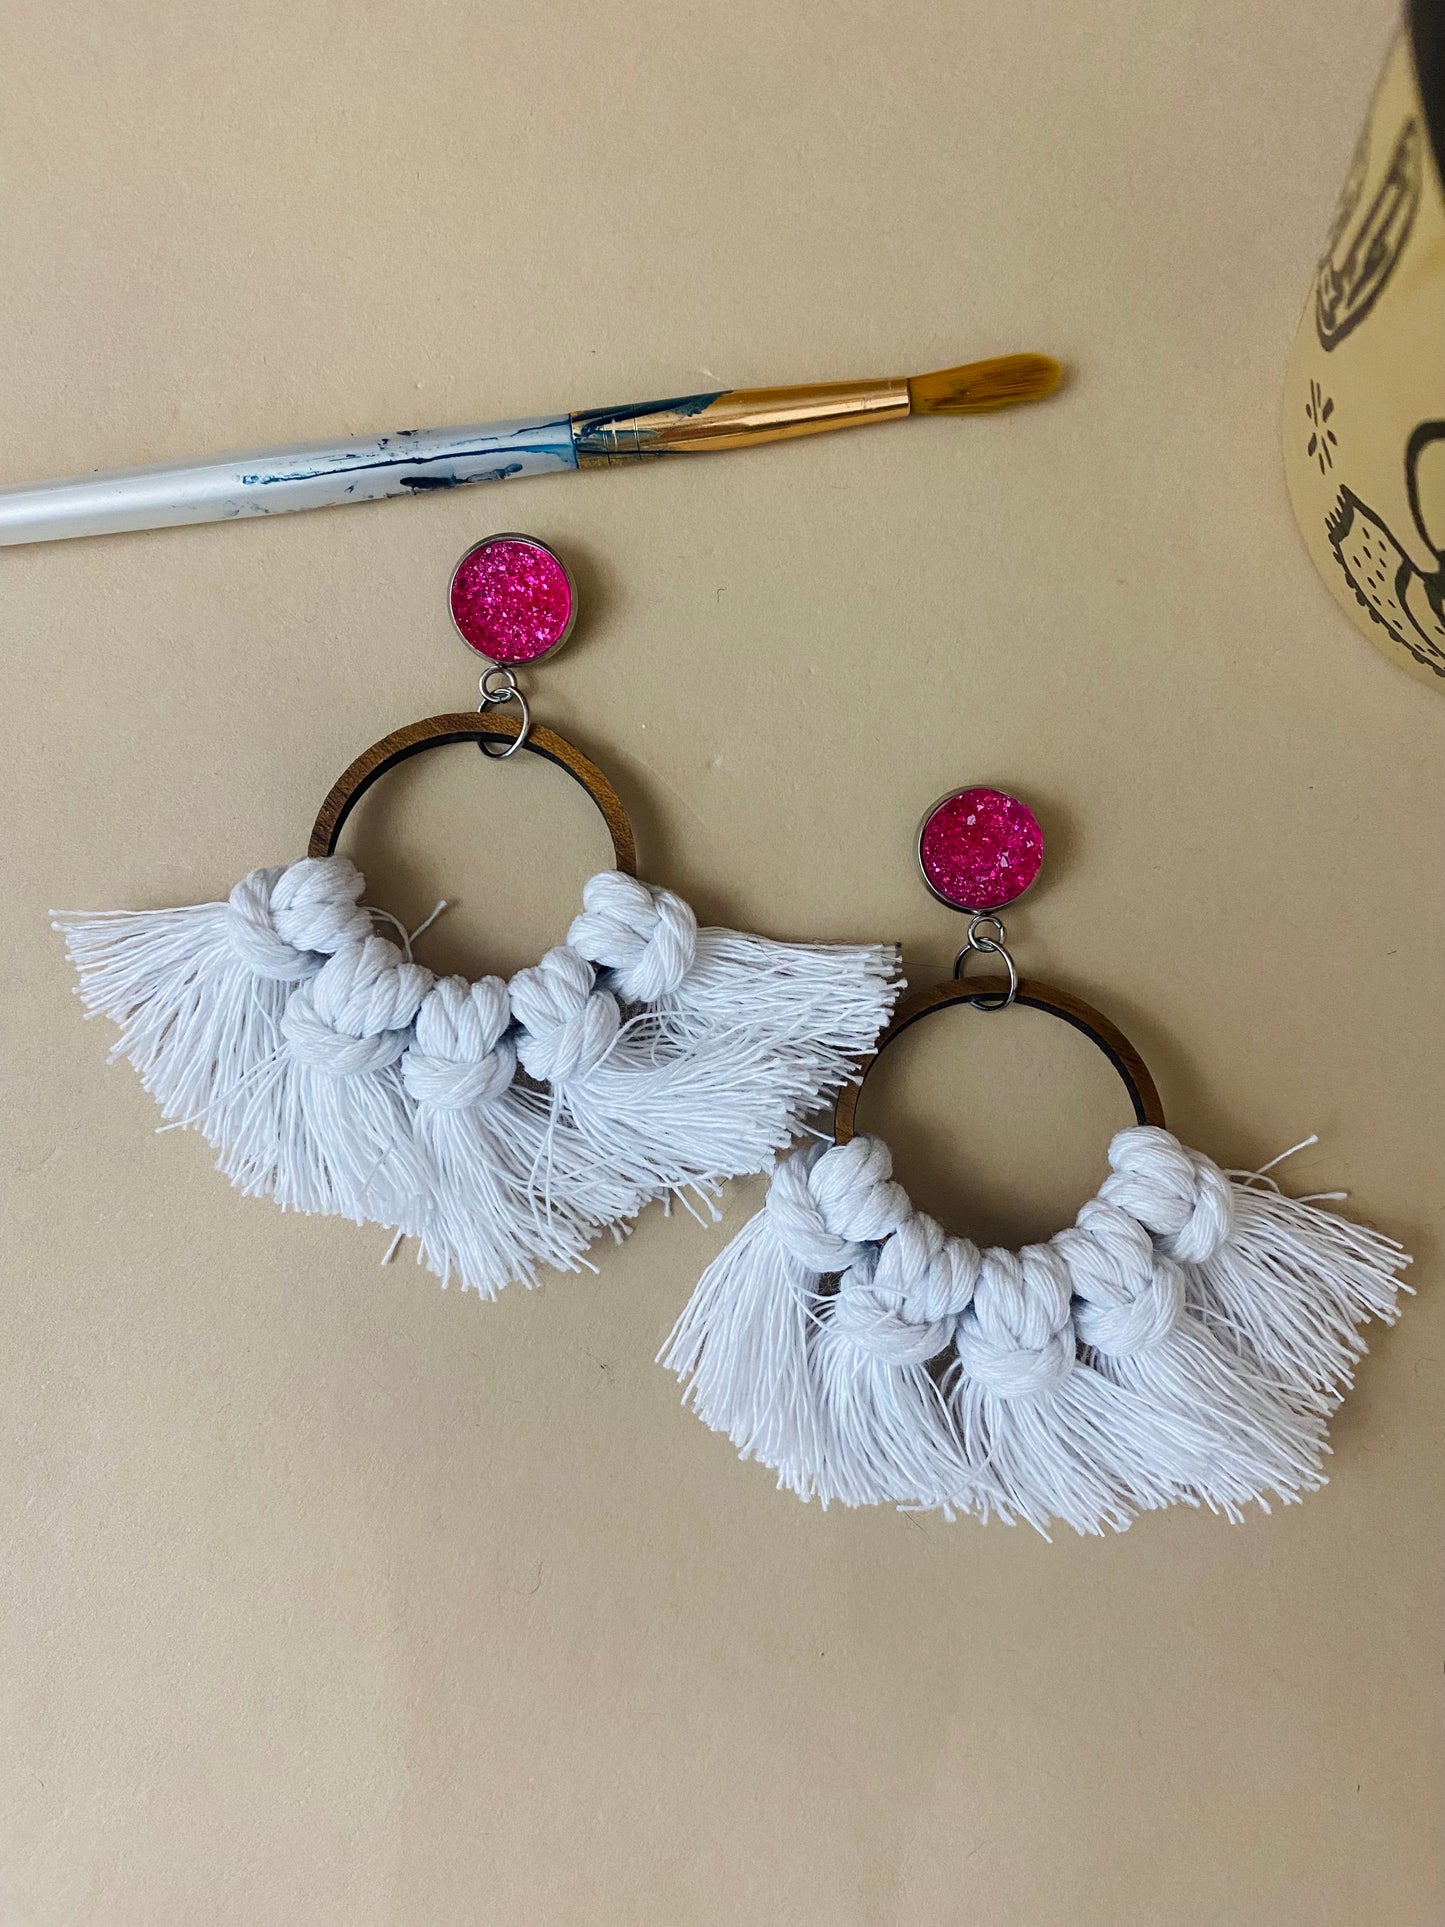 Hot pink and white macrame hoops